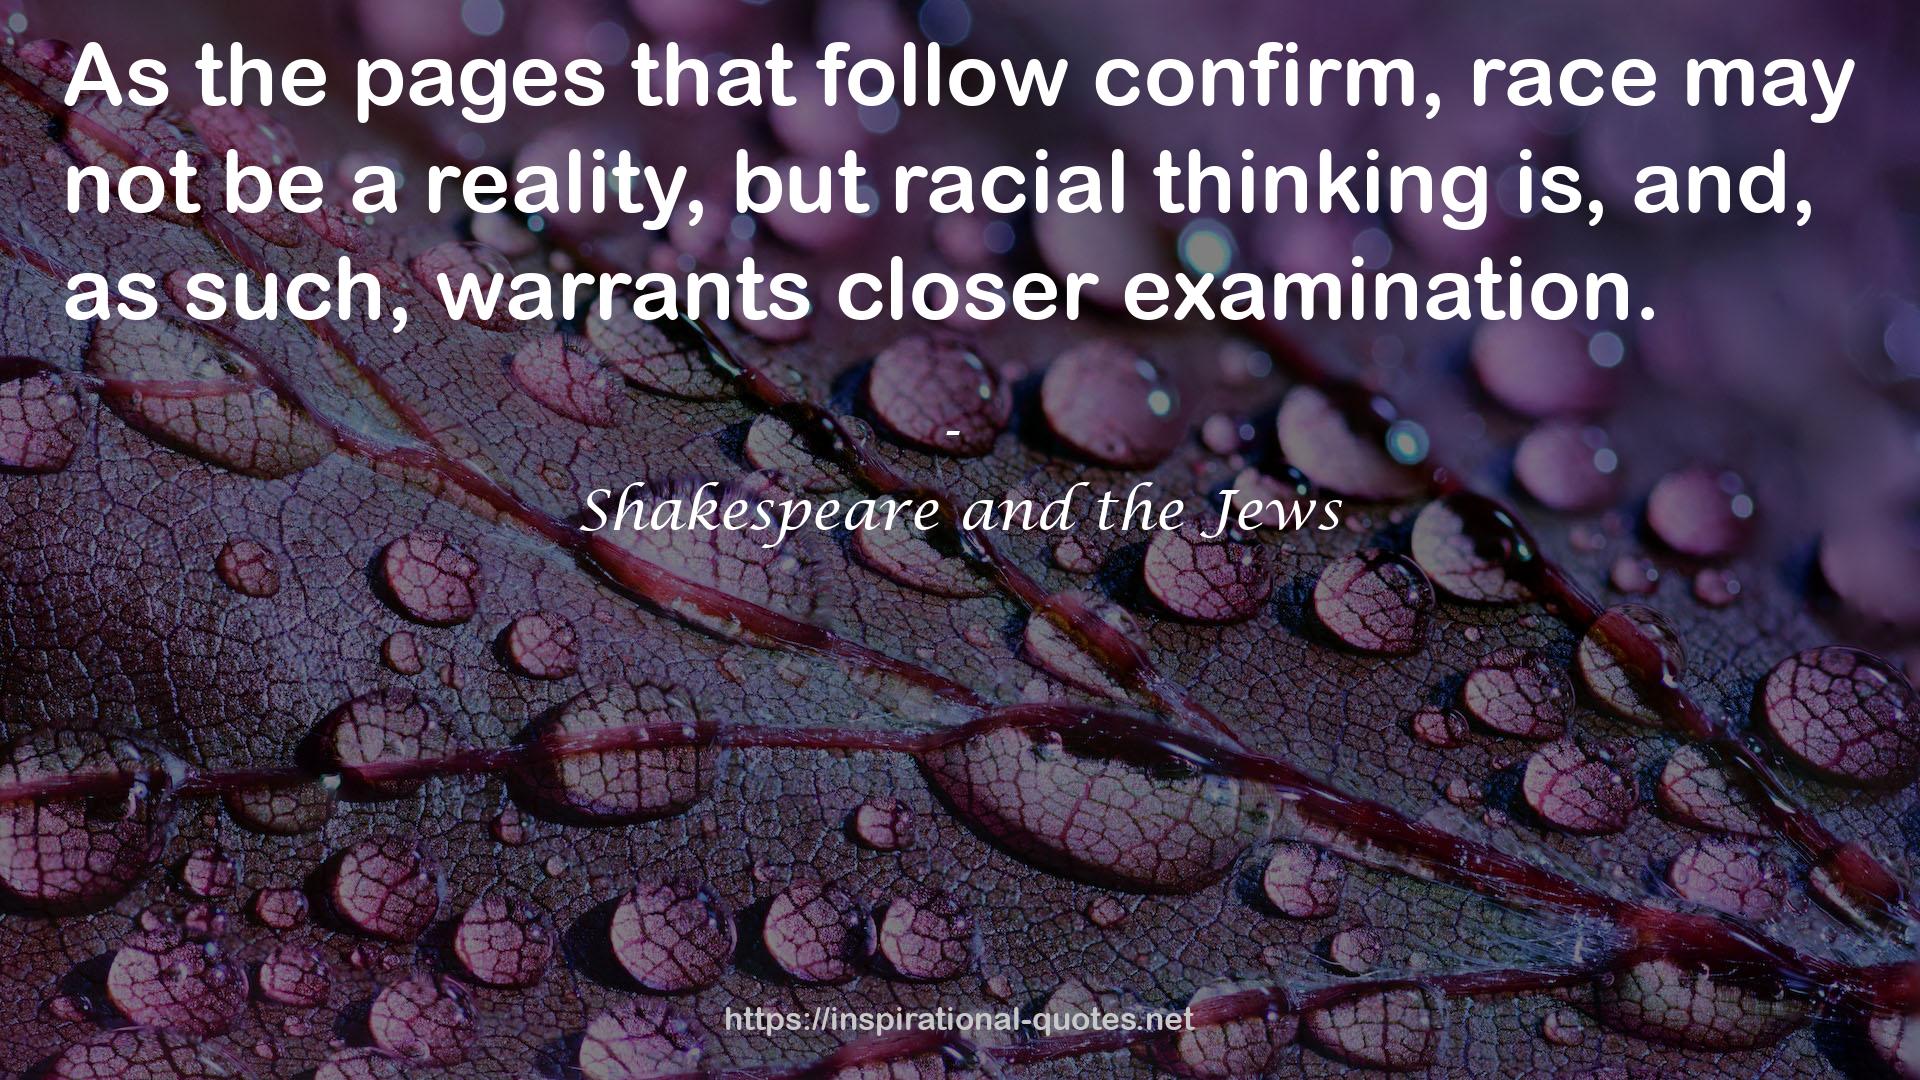 Shakespeare and the Jews QUOTES